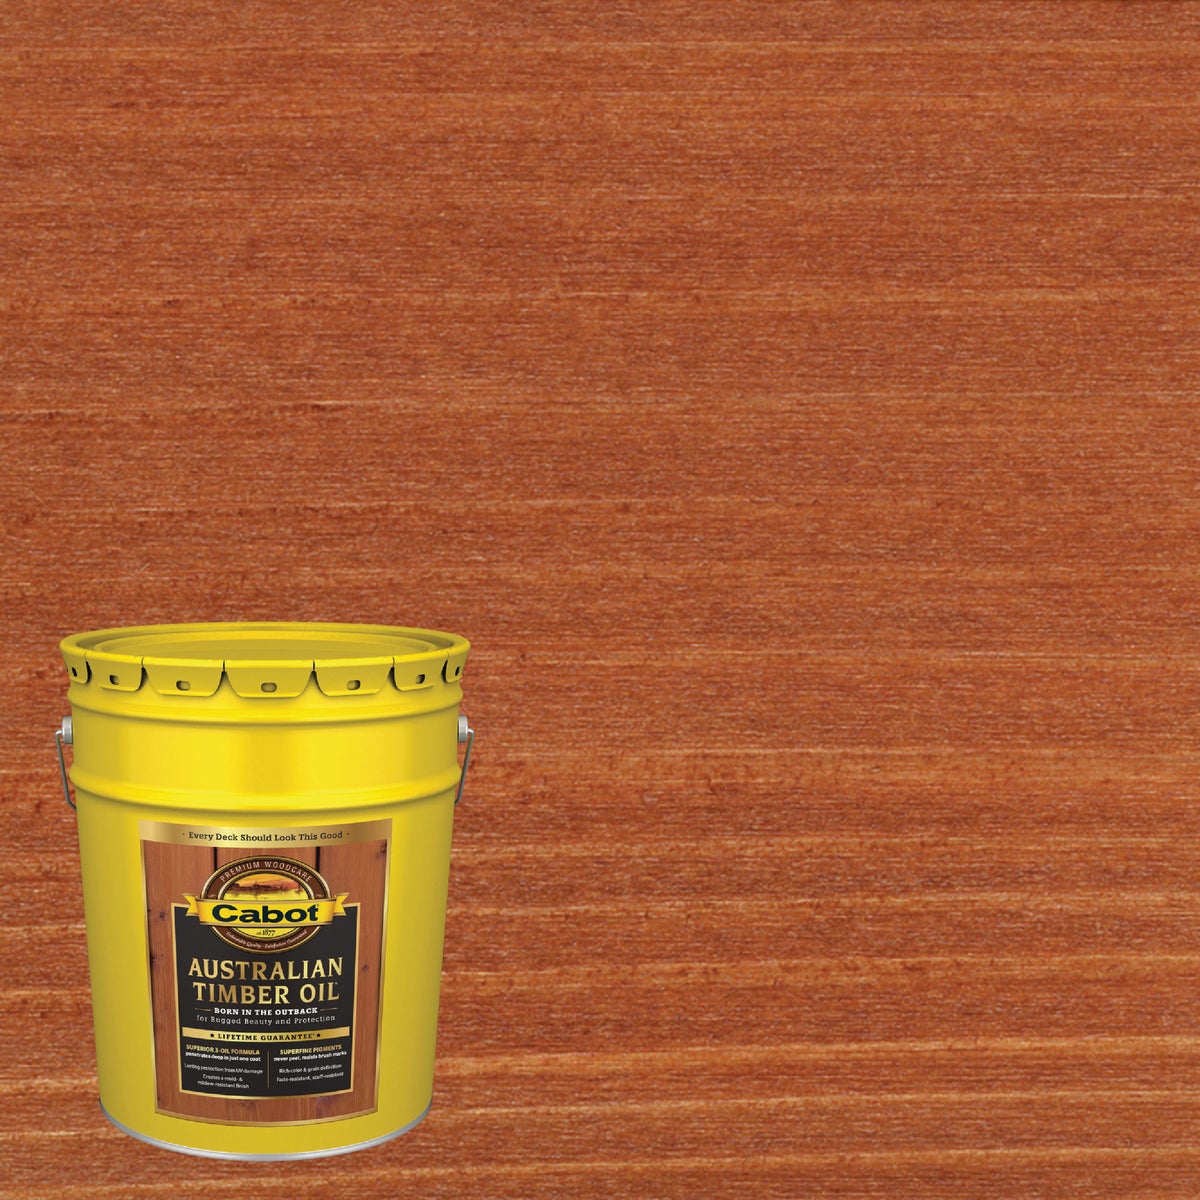 Cabot Australian Timber Oil Translucent Exterior Oil Finish, Mahogany Flame, 5 Gal.